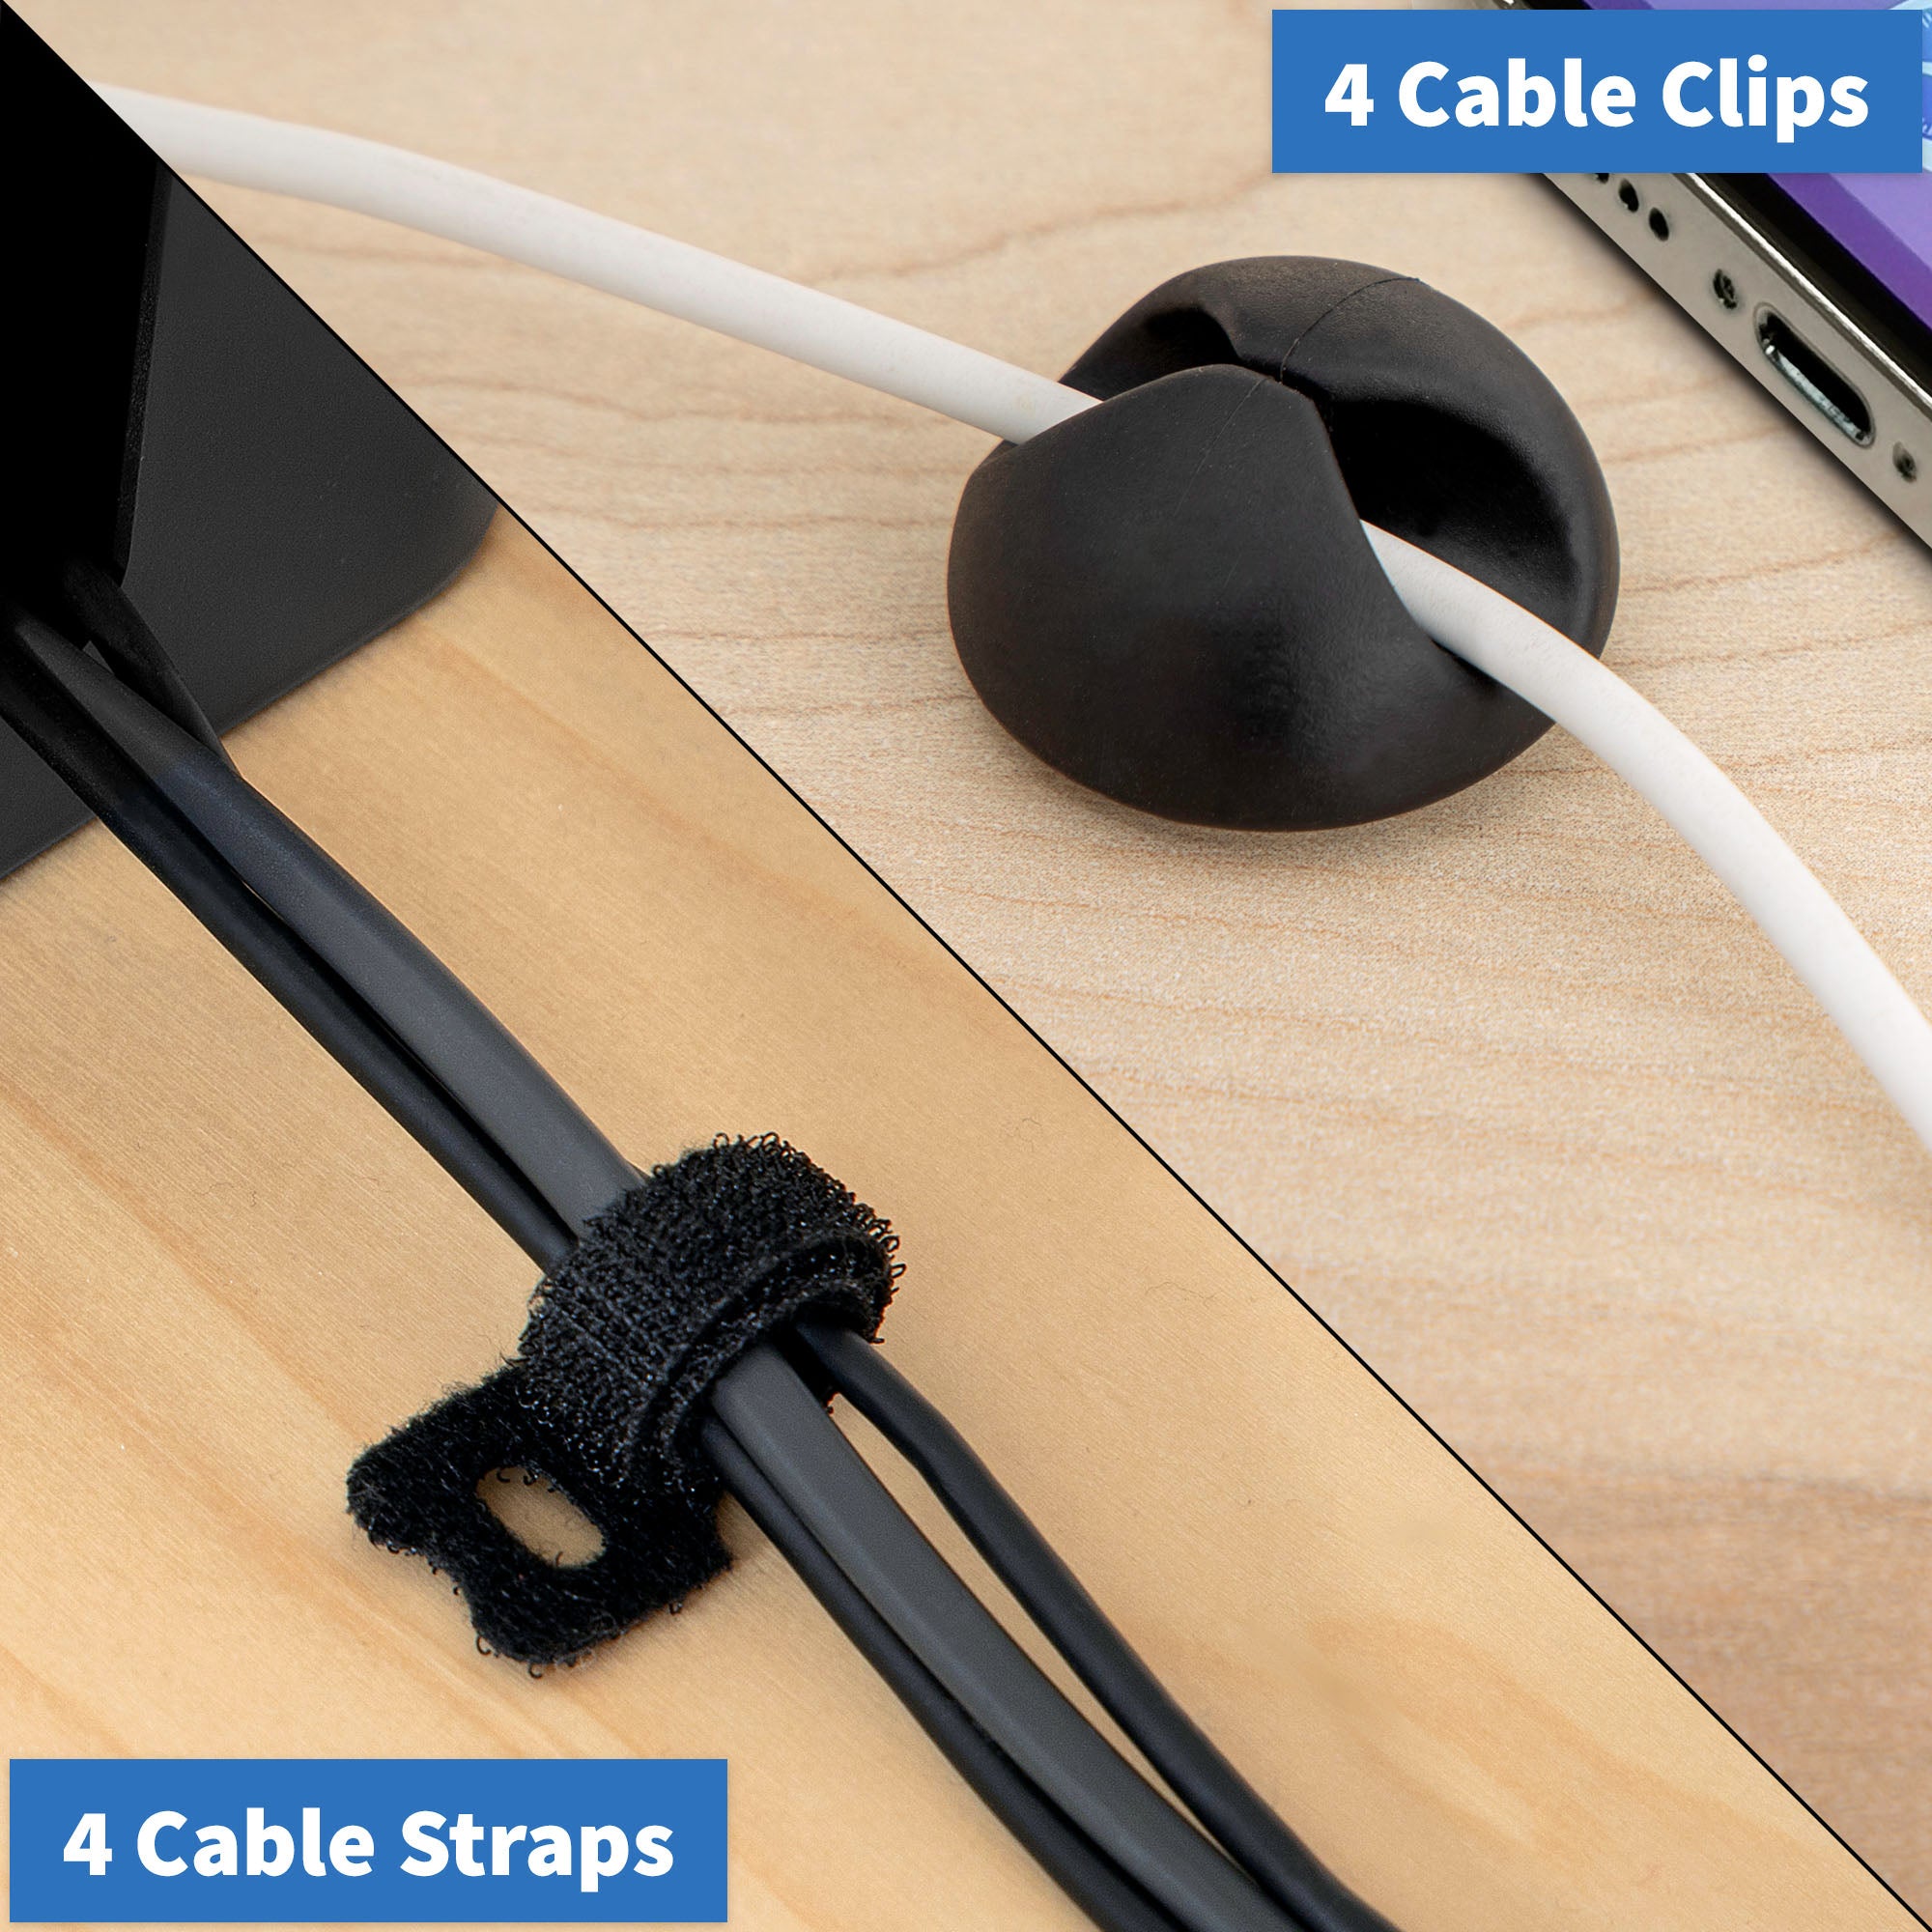  Under Desk Cable Organizer Cord Cover - Channel to Hide Power  Strips, Wires, Power Supplies, Surge Protectors at Home or Office -  SimpleCord : Electronics